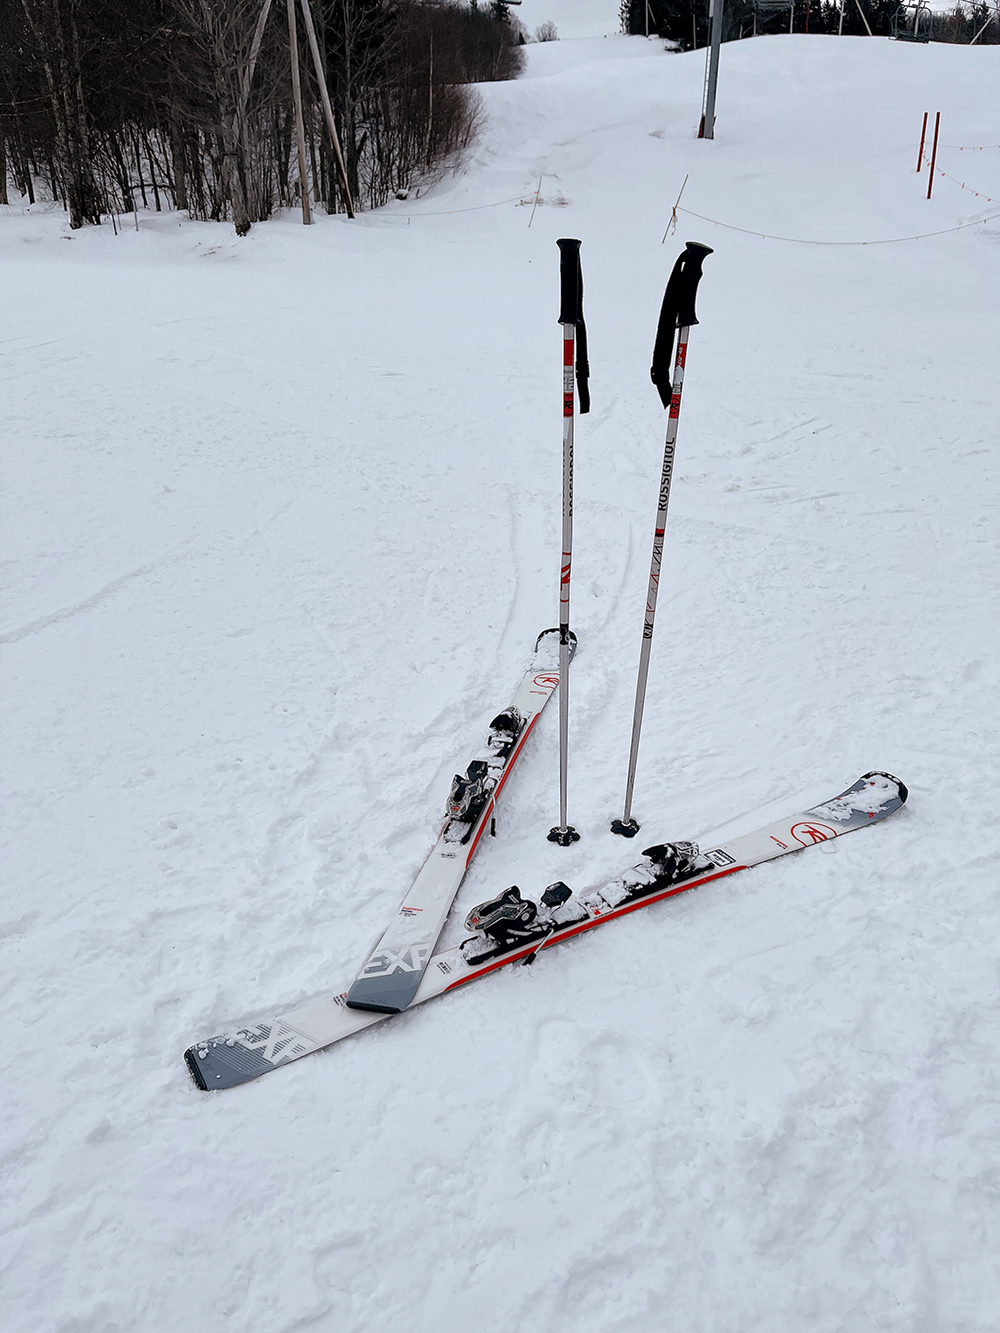 Winter Travel Guide- the Best Things to Do in Bolton Valley VT with your Family by Tabitha Blue - Ski lessons at Bolton Valley Resort!